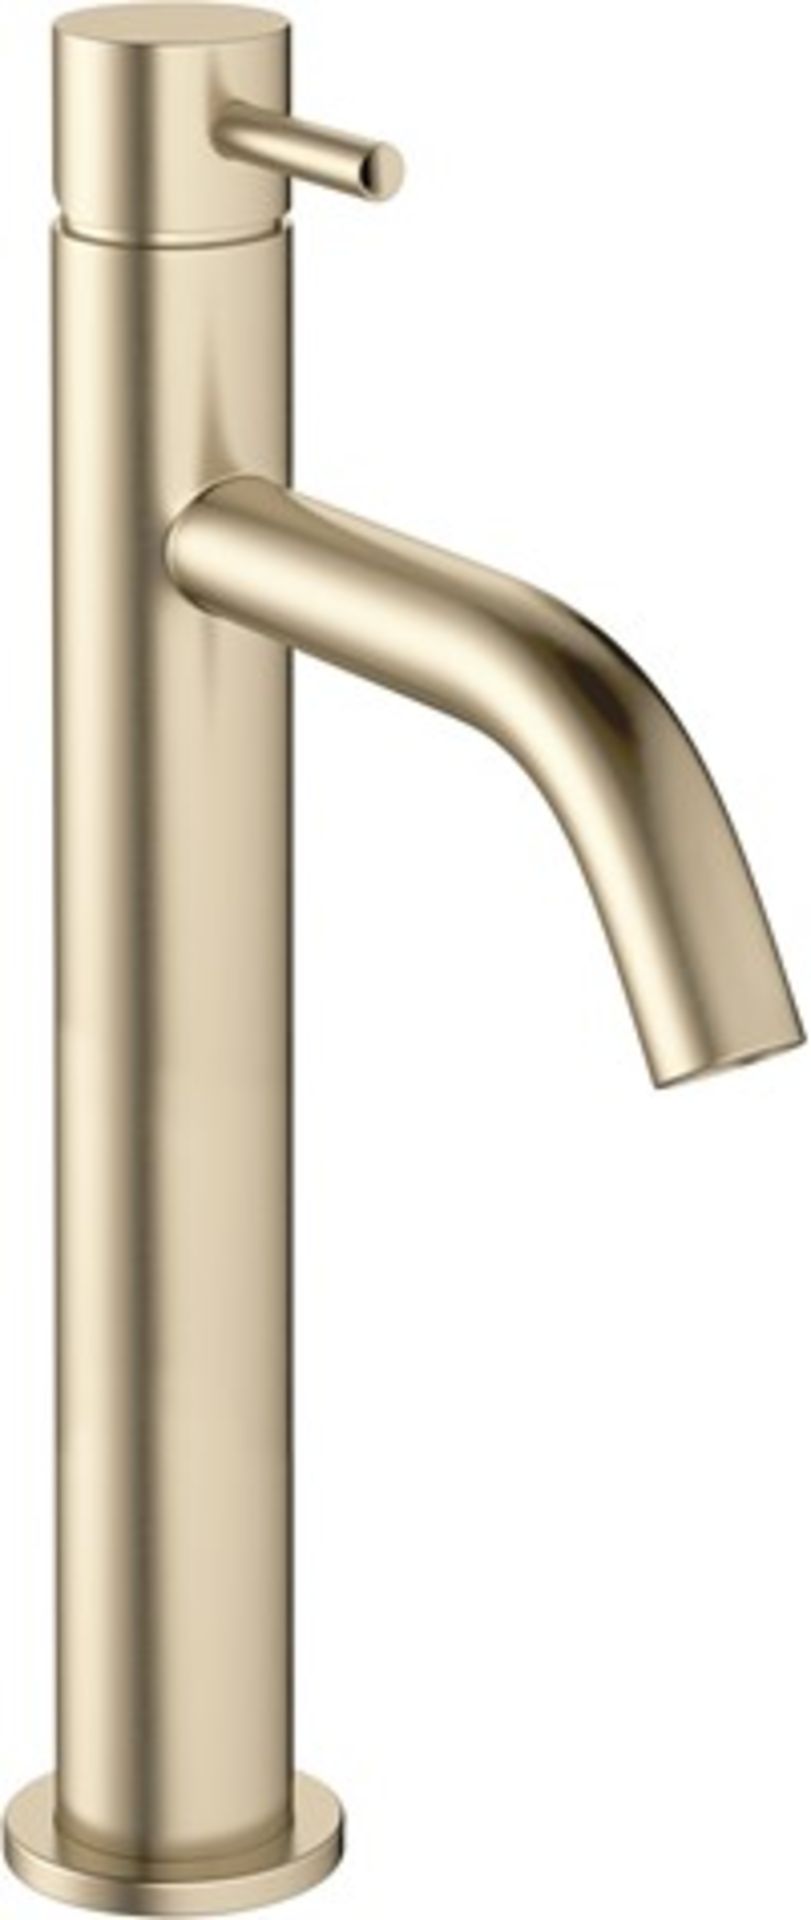 Crosswater Crosswater MPRO Deck Mounted Tall Basin Mixer Tap - Brushed Brass